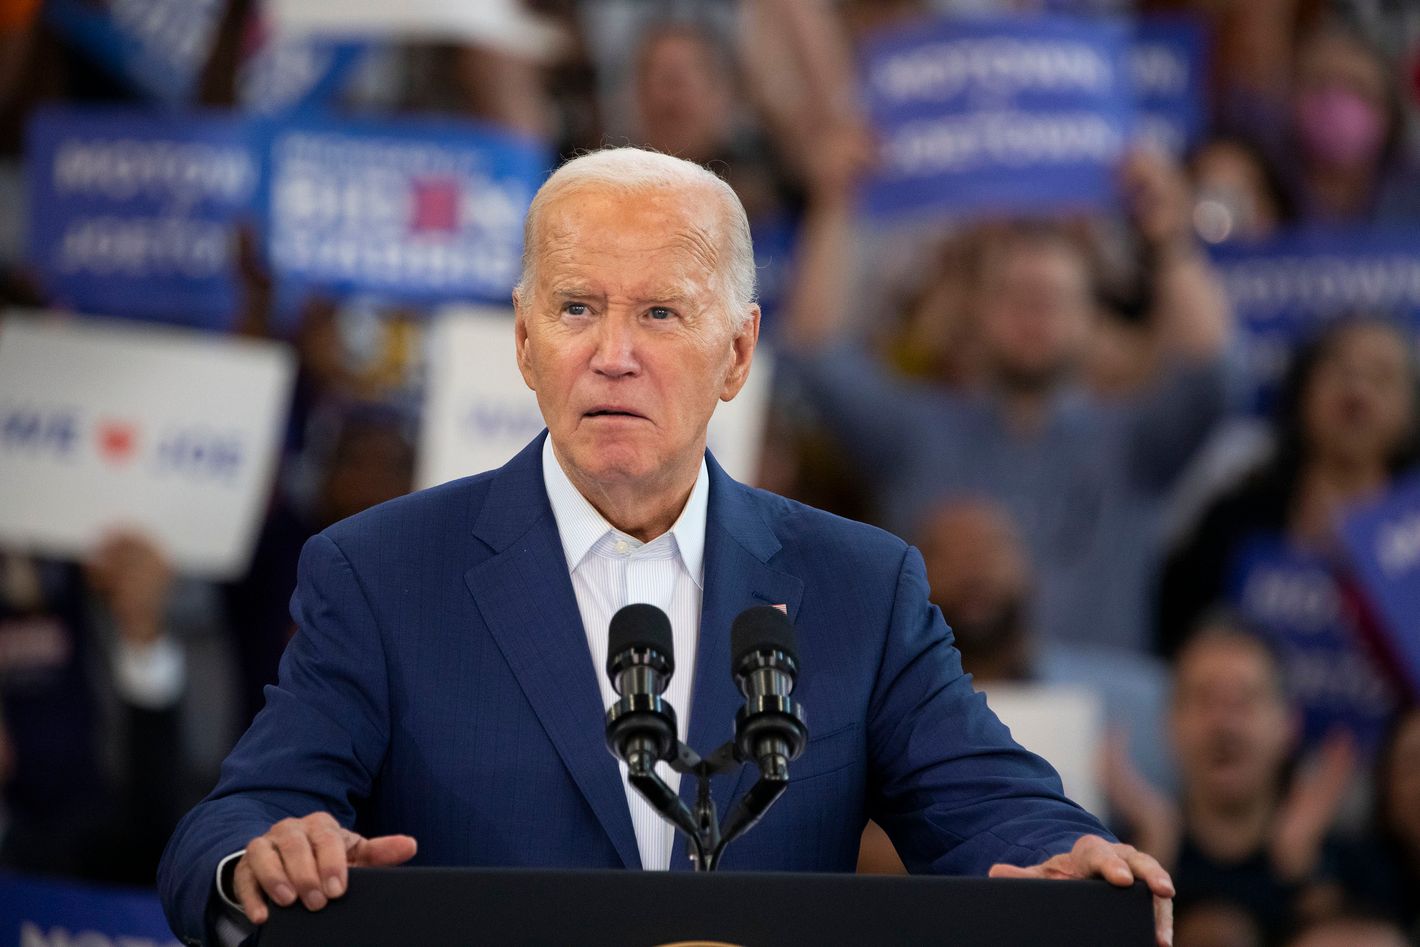 Biden Can Drop Out With Dignity — If He Just Tells the Truth